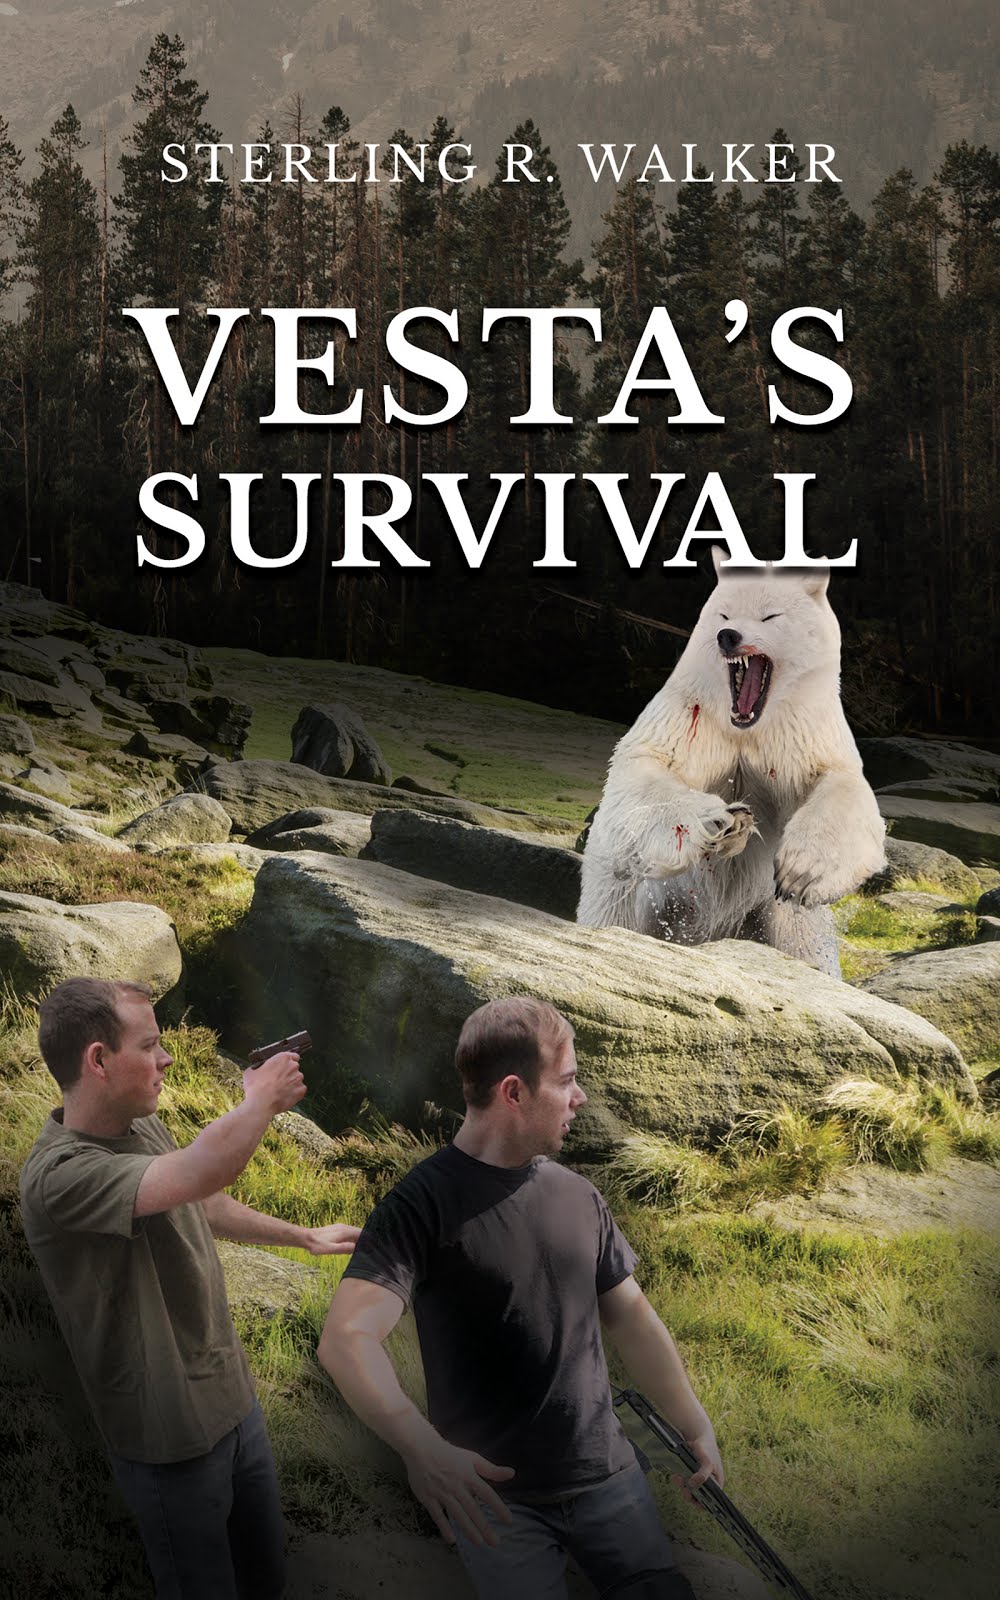 Vesta's Survival is available on Kindle and in paperback at Amazon.com